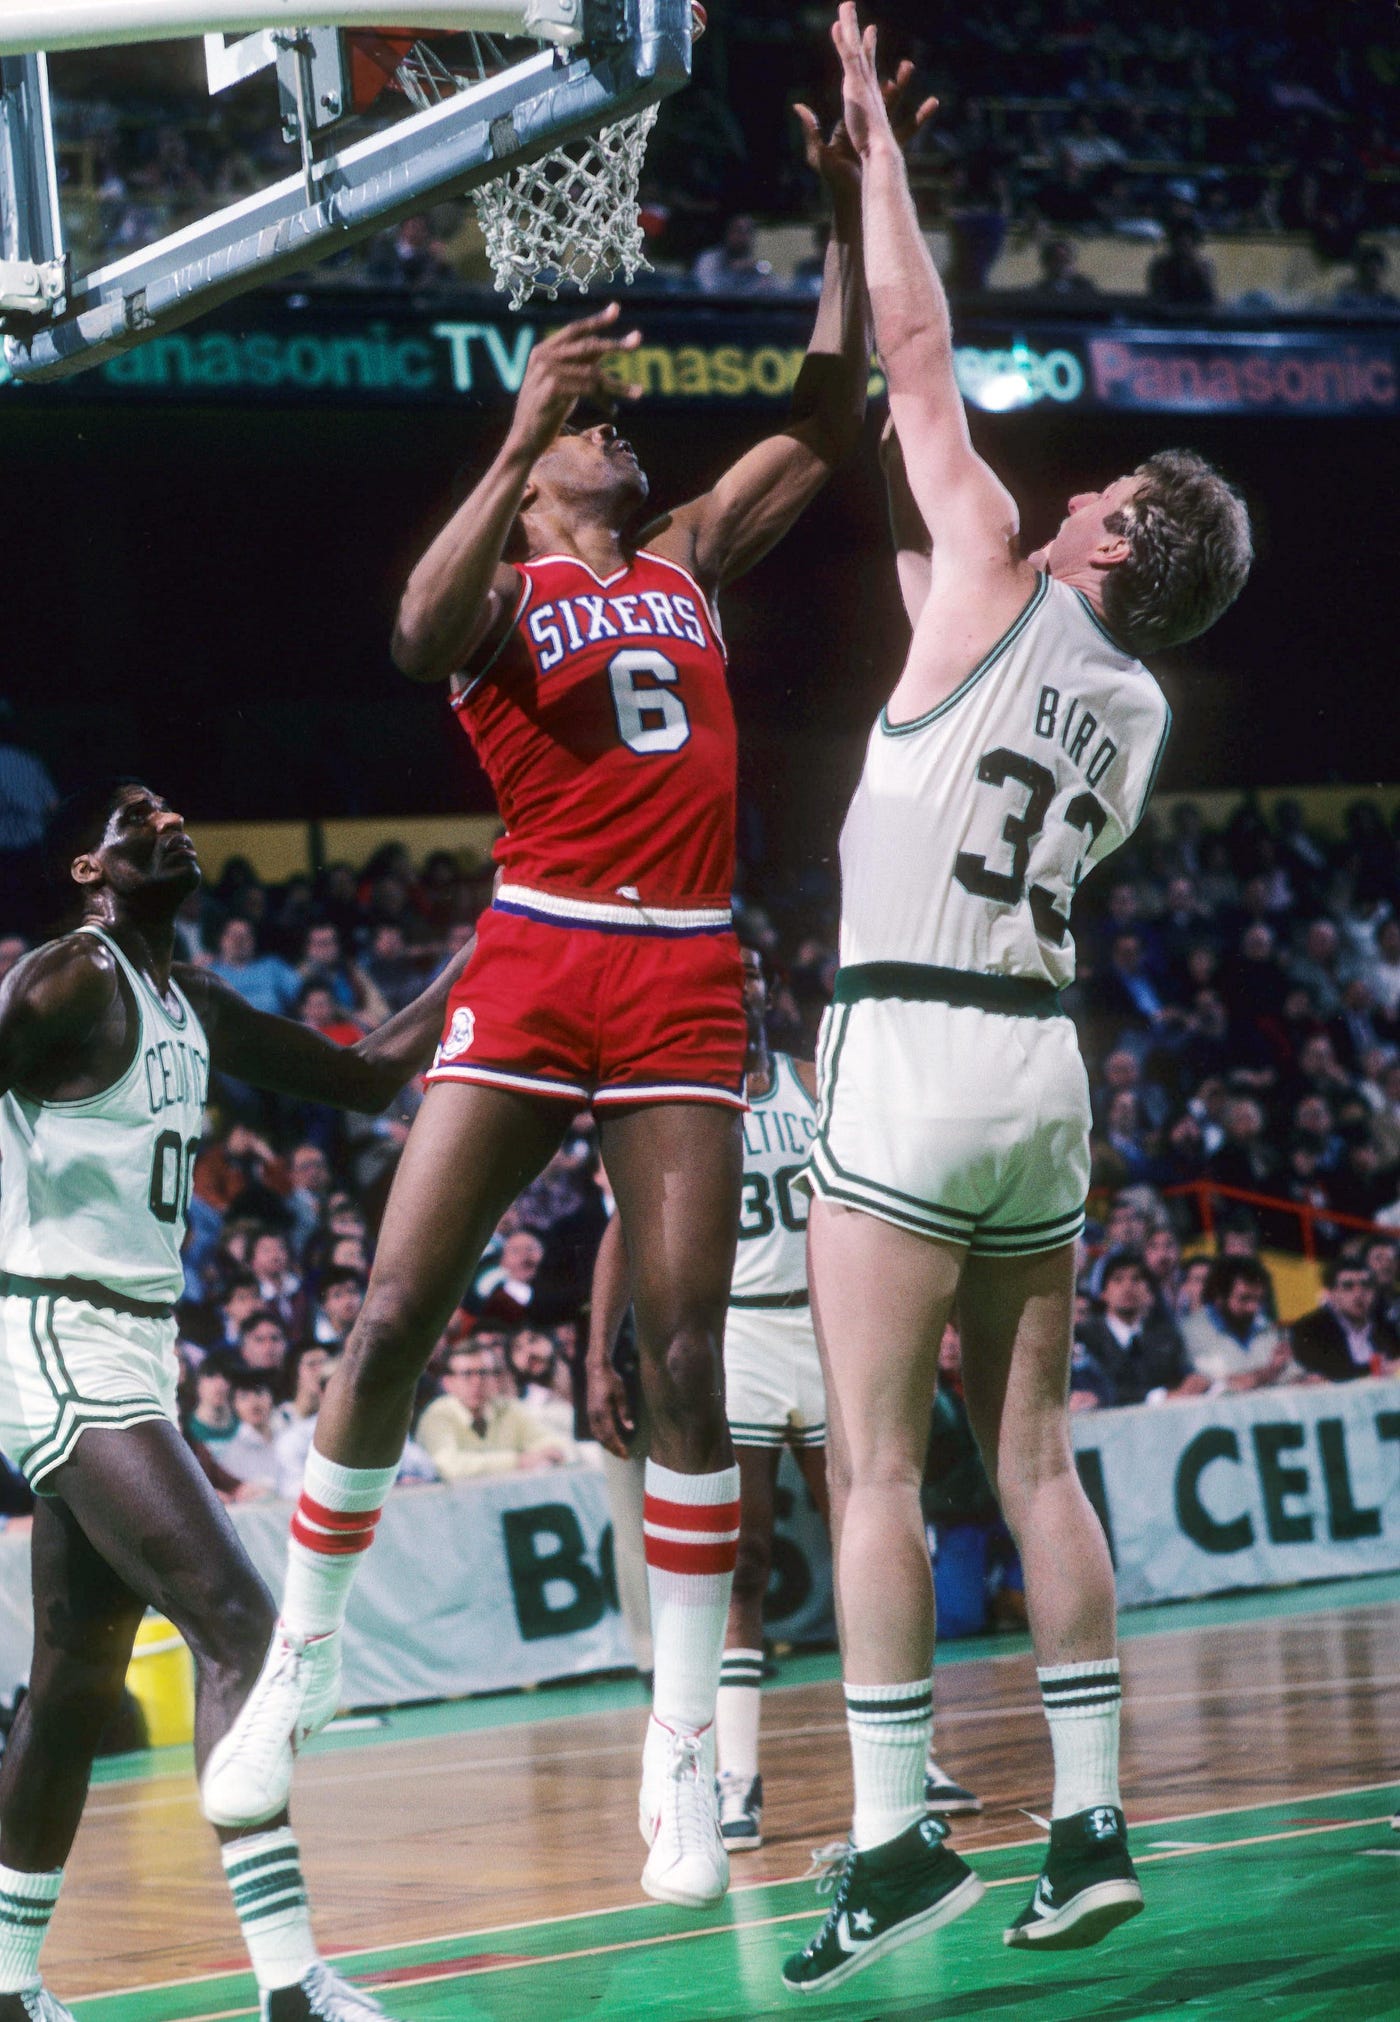 Watch: Who's coming in second? - Throwback to when Larry Bird